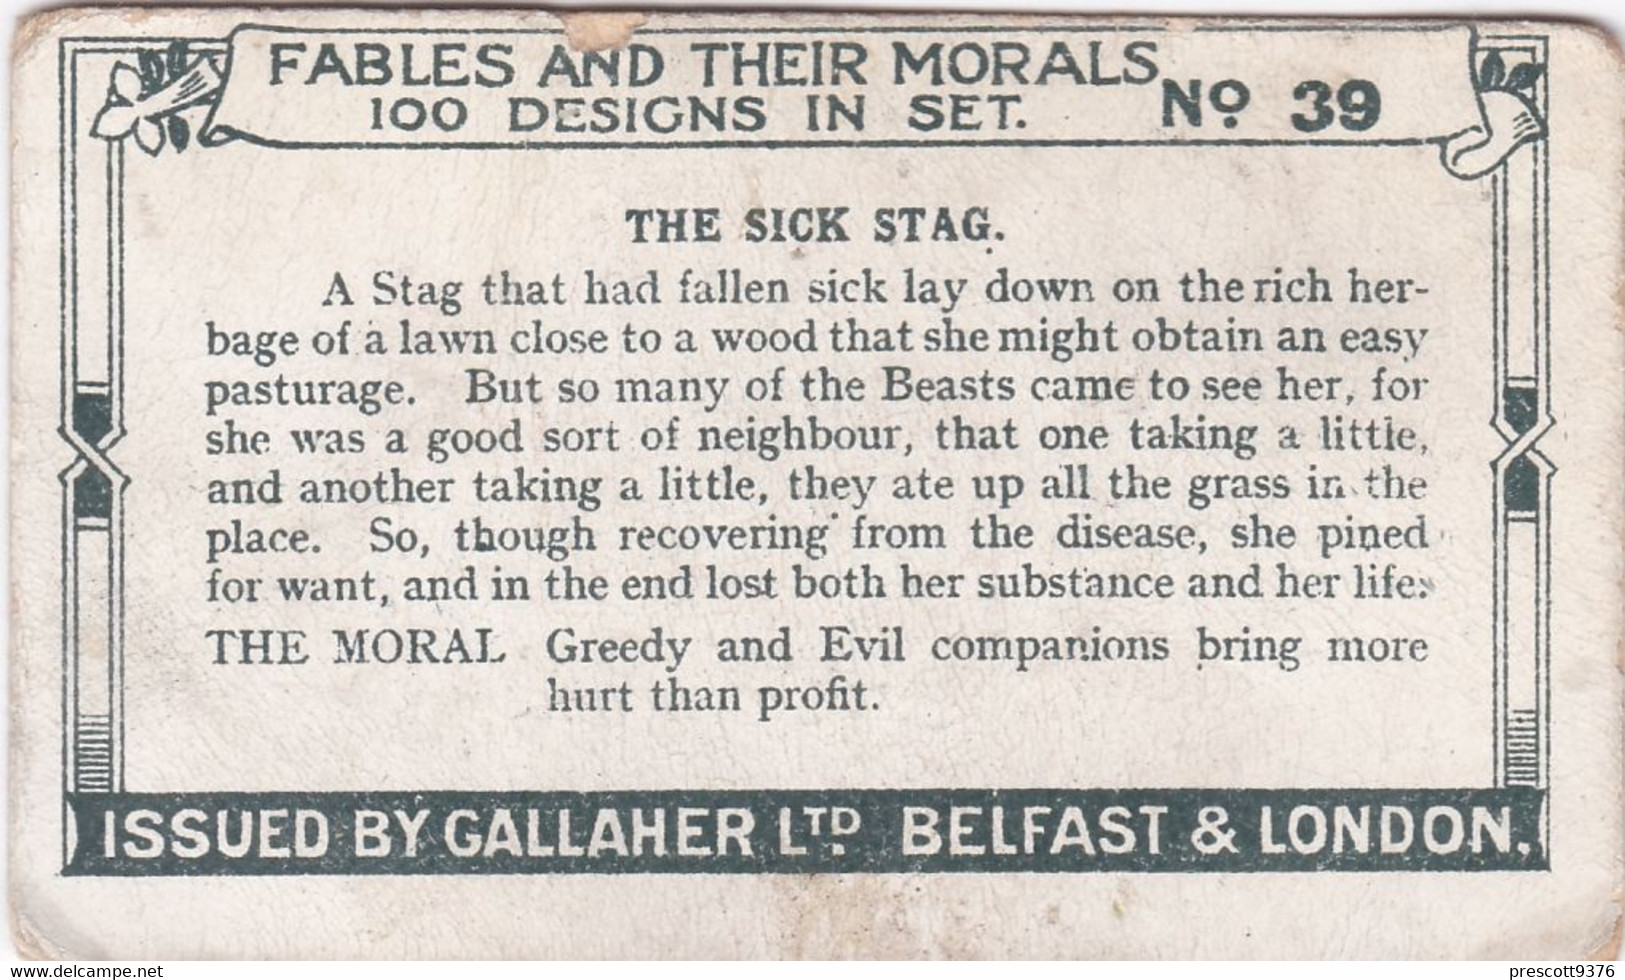 39 The Sick Stag, Fables & Their Morals 1922  - Gallaher Cigarette Card - Original - Antique - Gallaher